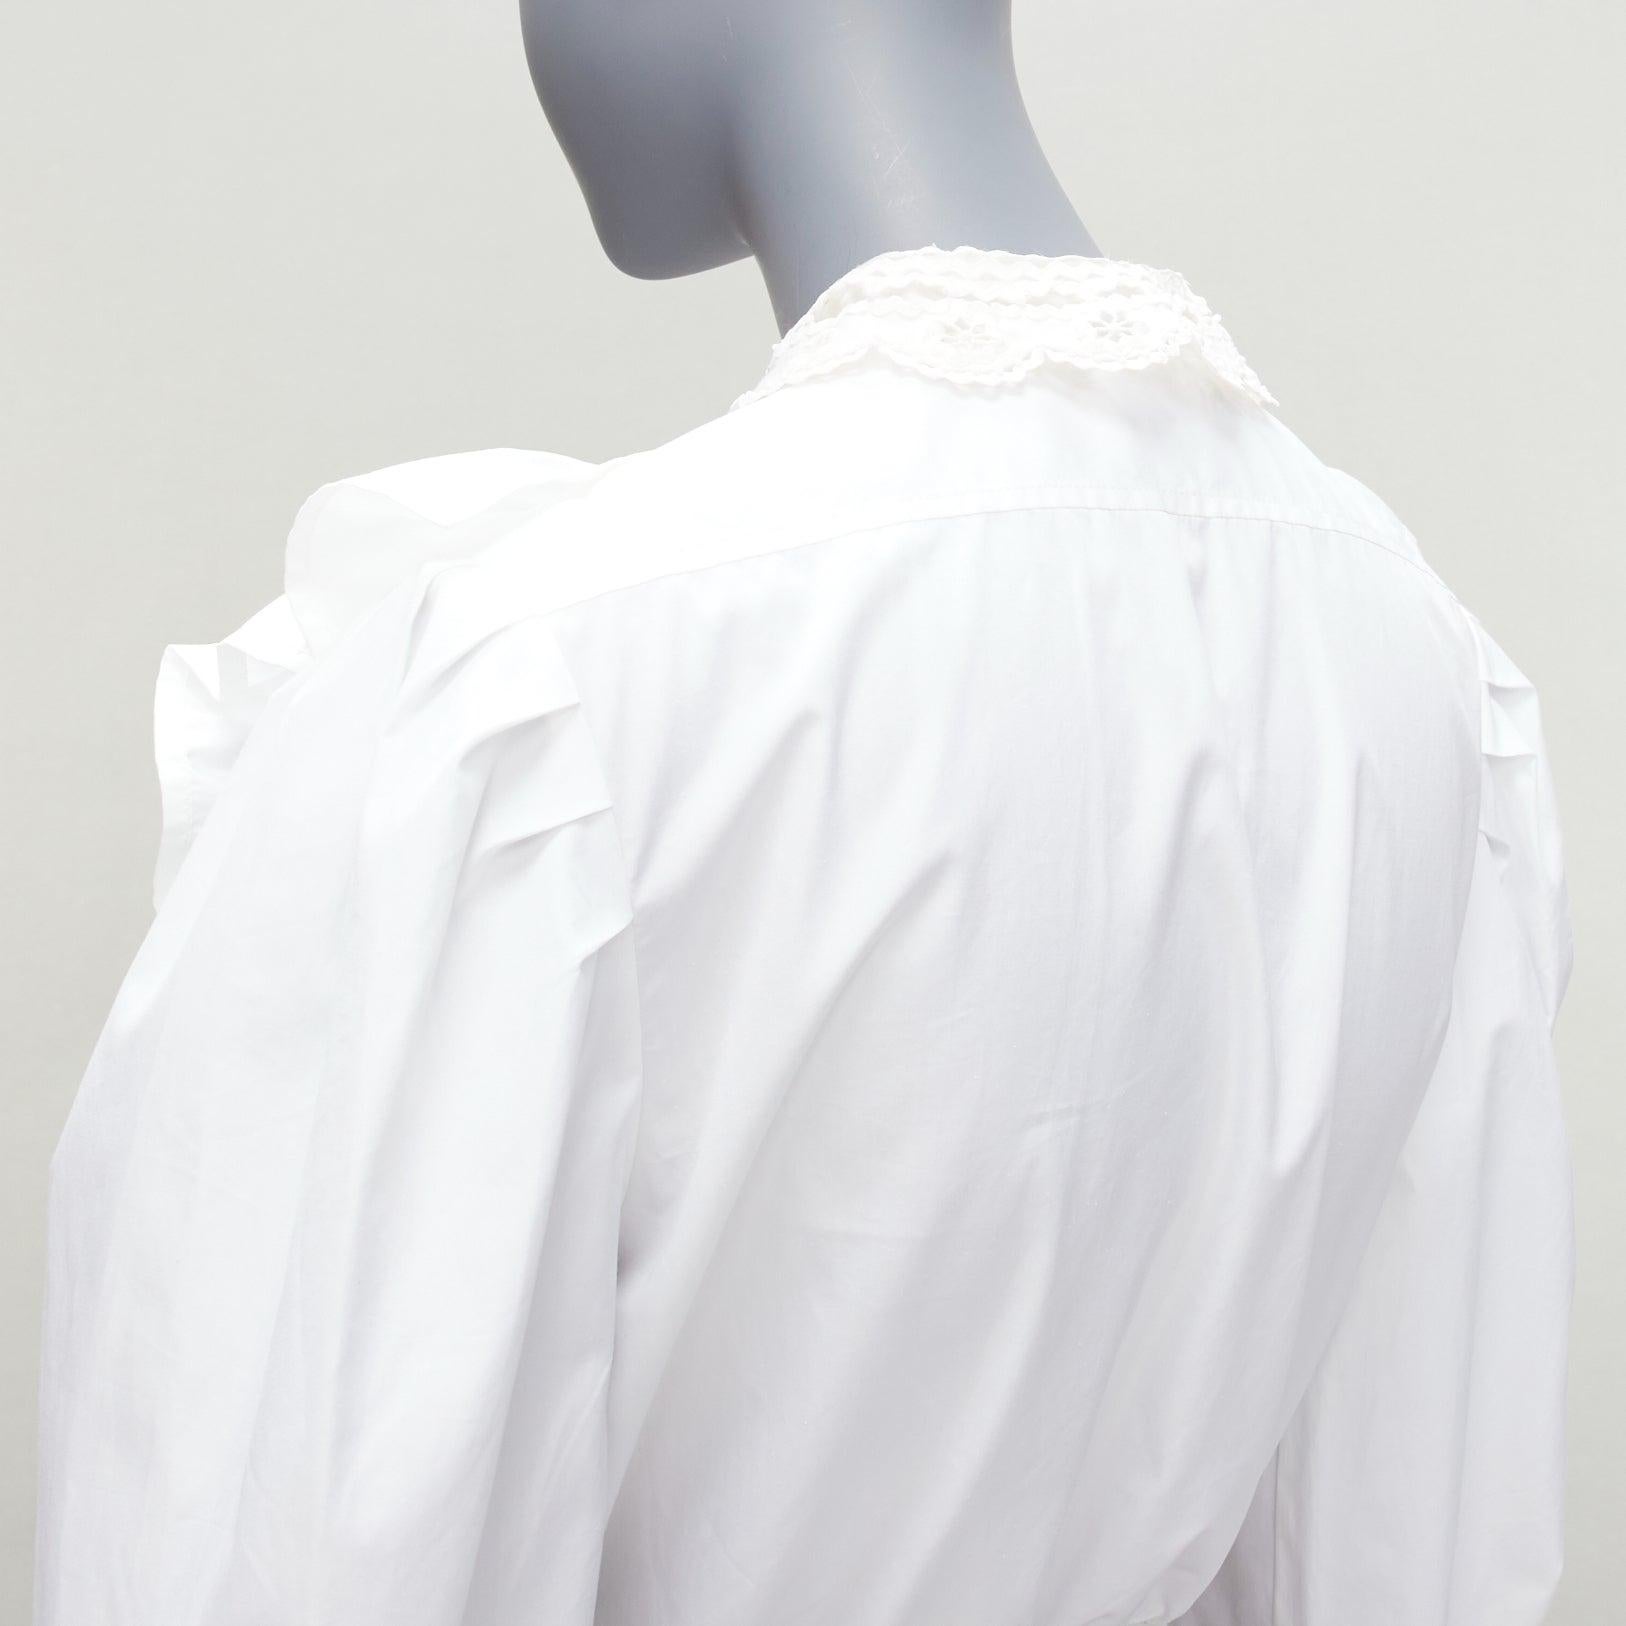 MIU MIU 2018 white ruffle crystal button cropped Victorian shirt IT38 XS
Reference: BSHW/A00026
Brand: Miu Miu
Designer: Miuccia Prada
Collection: 2018
Material: Cotton
Color: White, Clear
Pattern: Solid
Closure: Button
Extra Details: Puff sleeves